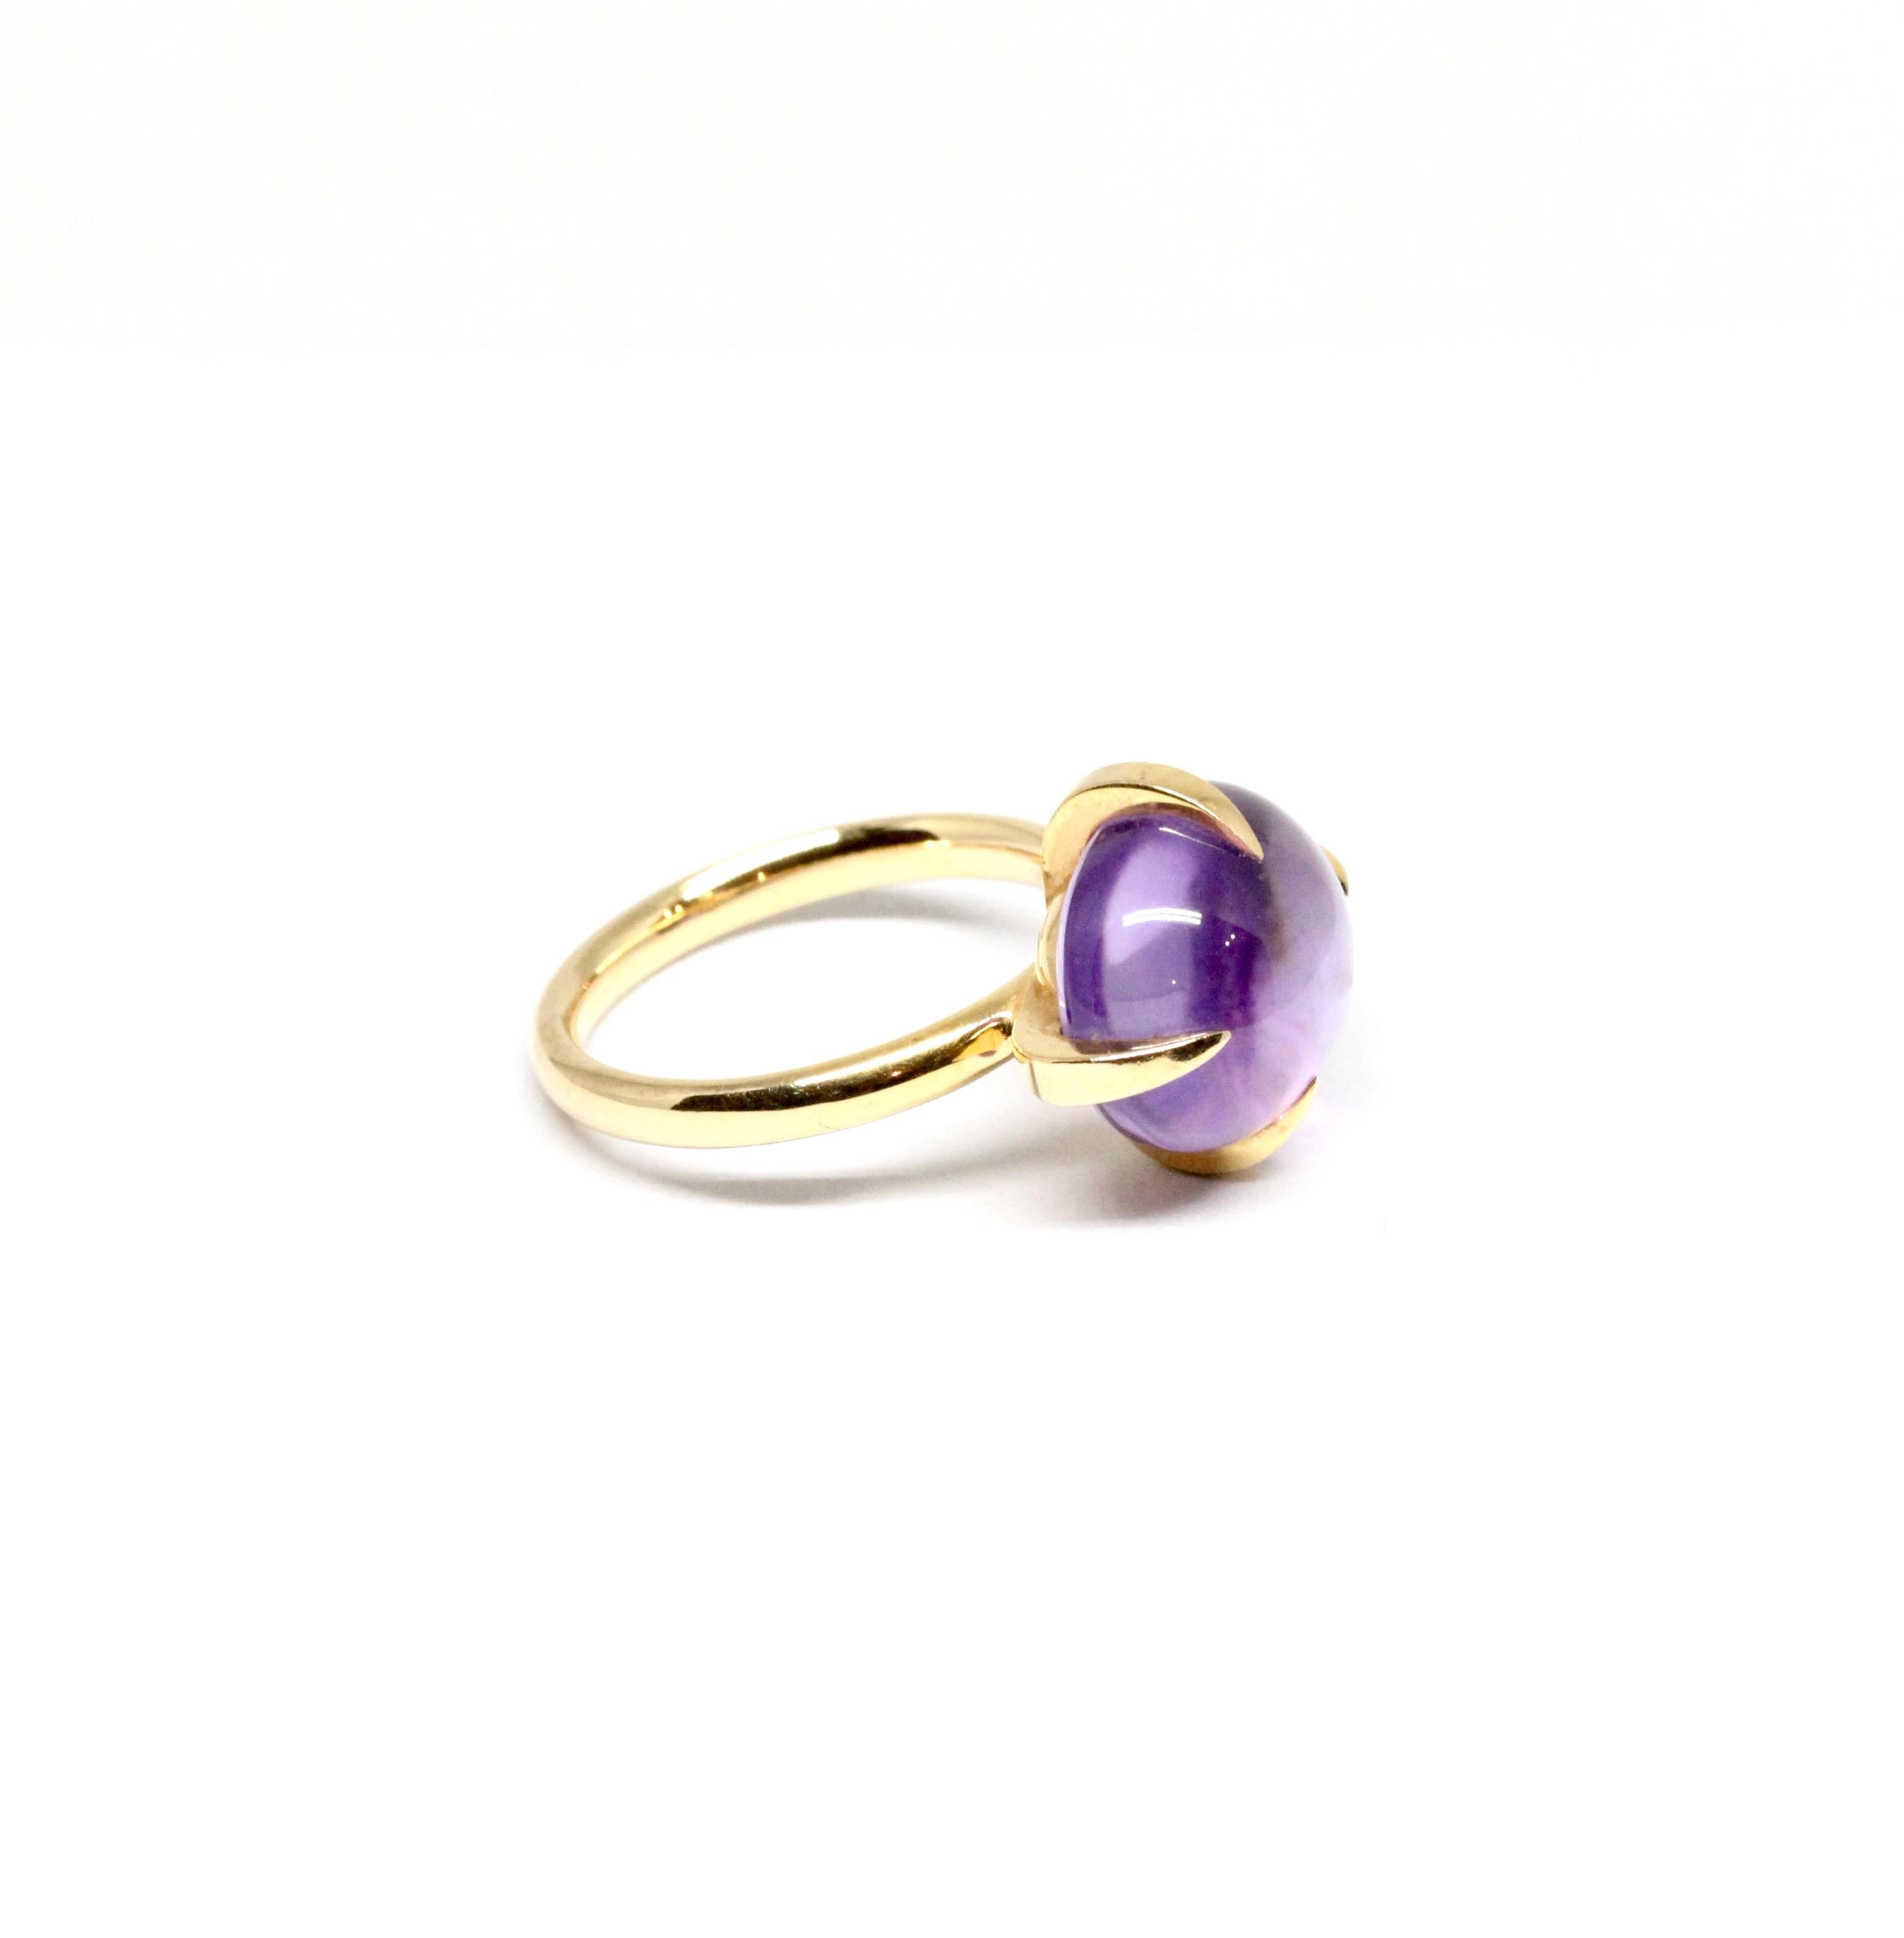 This pre-owned stunning elegant Pomellato ring from the Veleno collection features a cabochon cut amethyst gemstone supported by four golden prongs set in 18k rose gold.

Estimated ring weight: 6.6 grams
Ring size: 52
